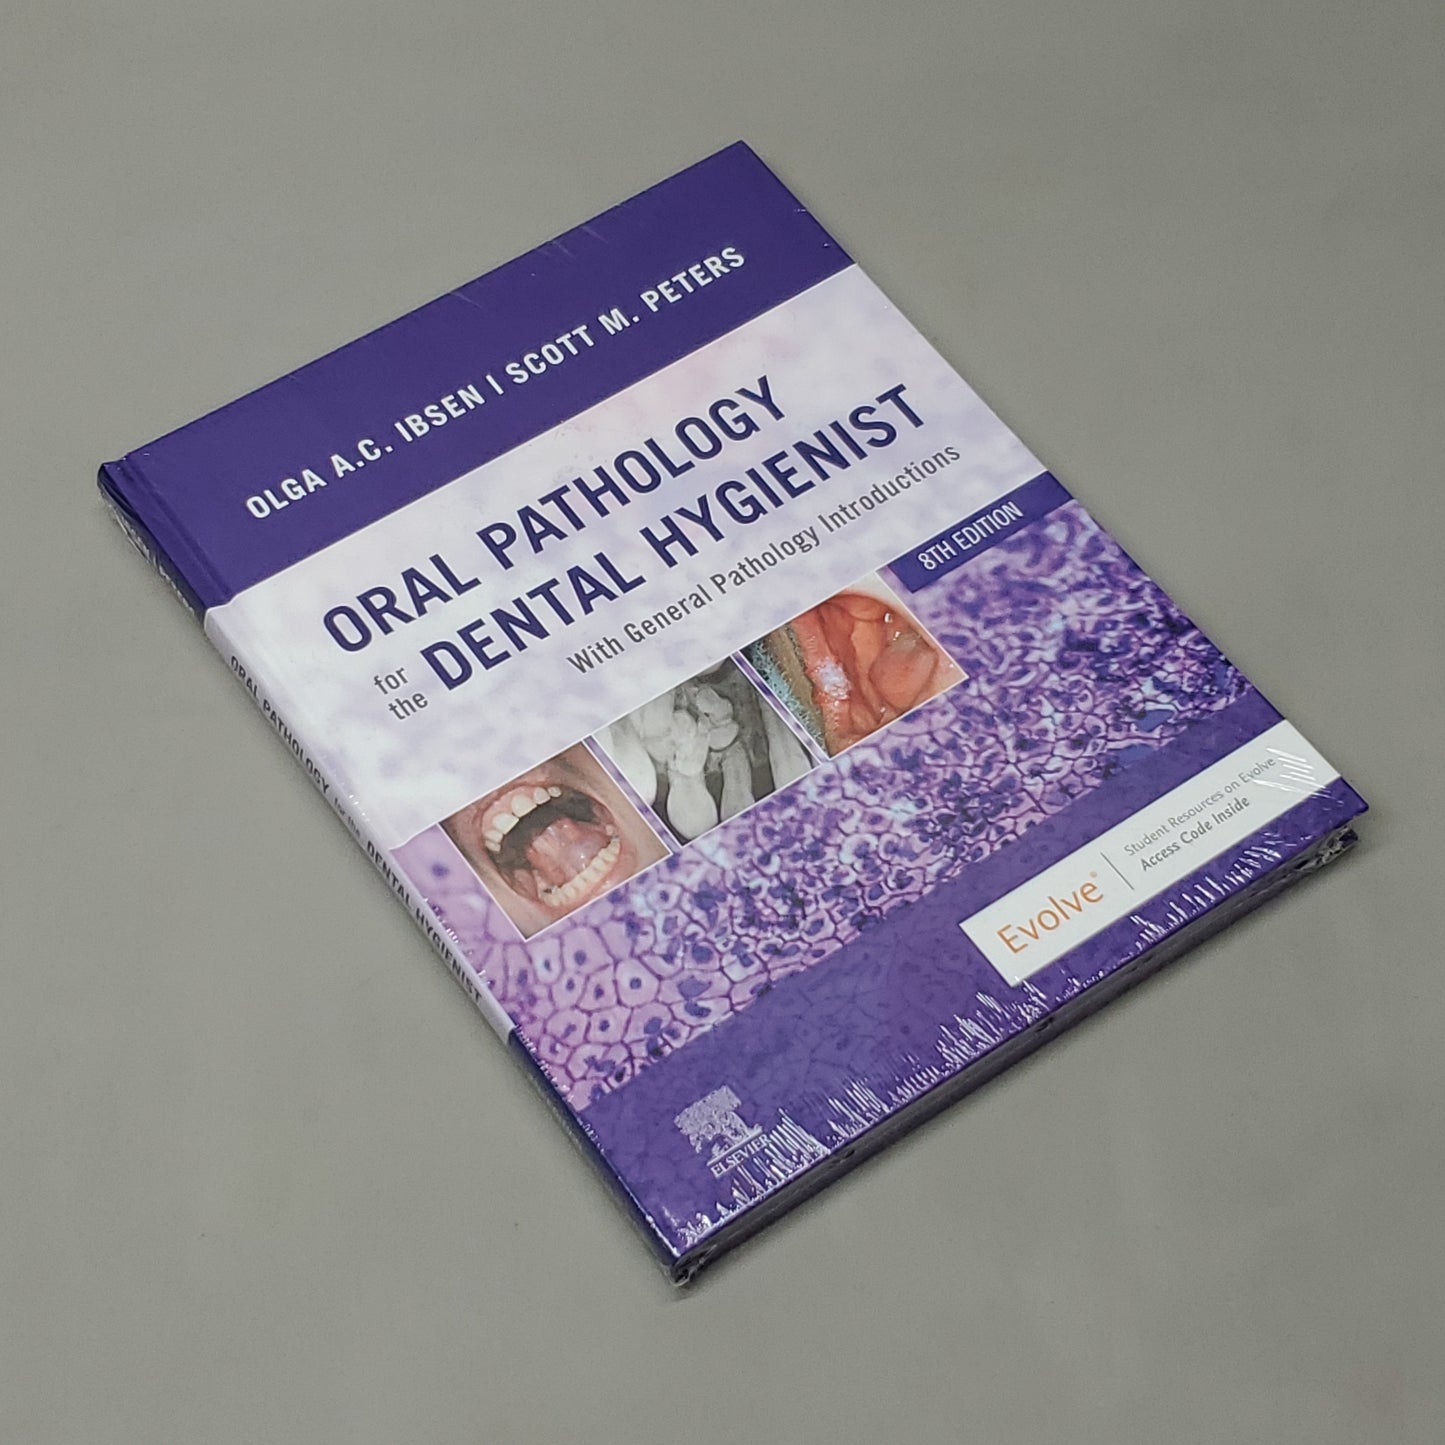 ELSEVIER Oral Pathology for the Dental Hygienist 8th Edition Olga Ibsen & Scott Peters (New)